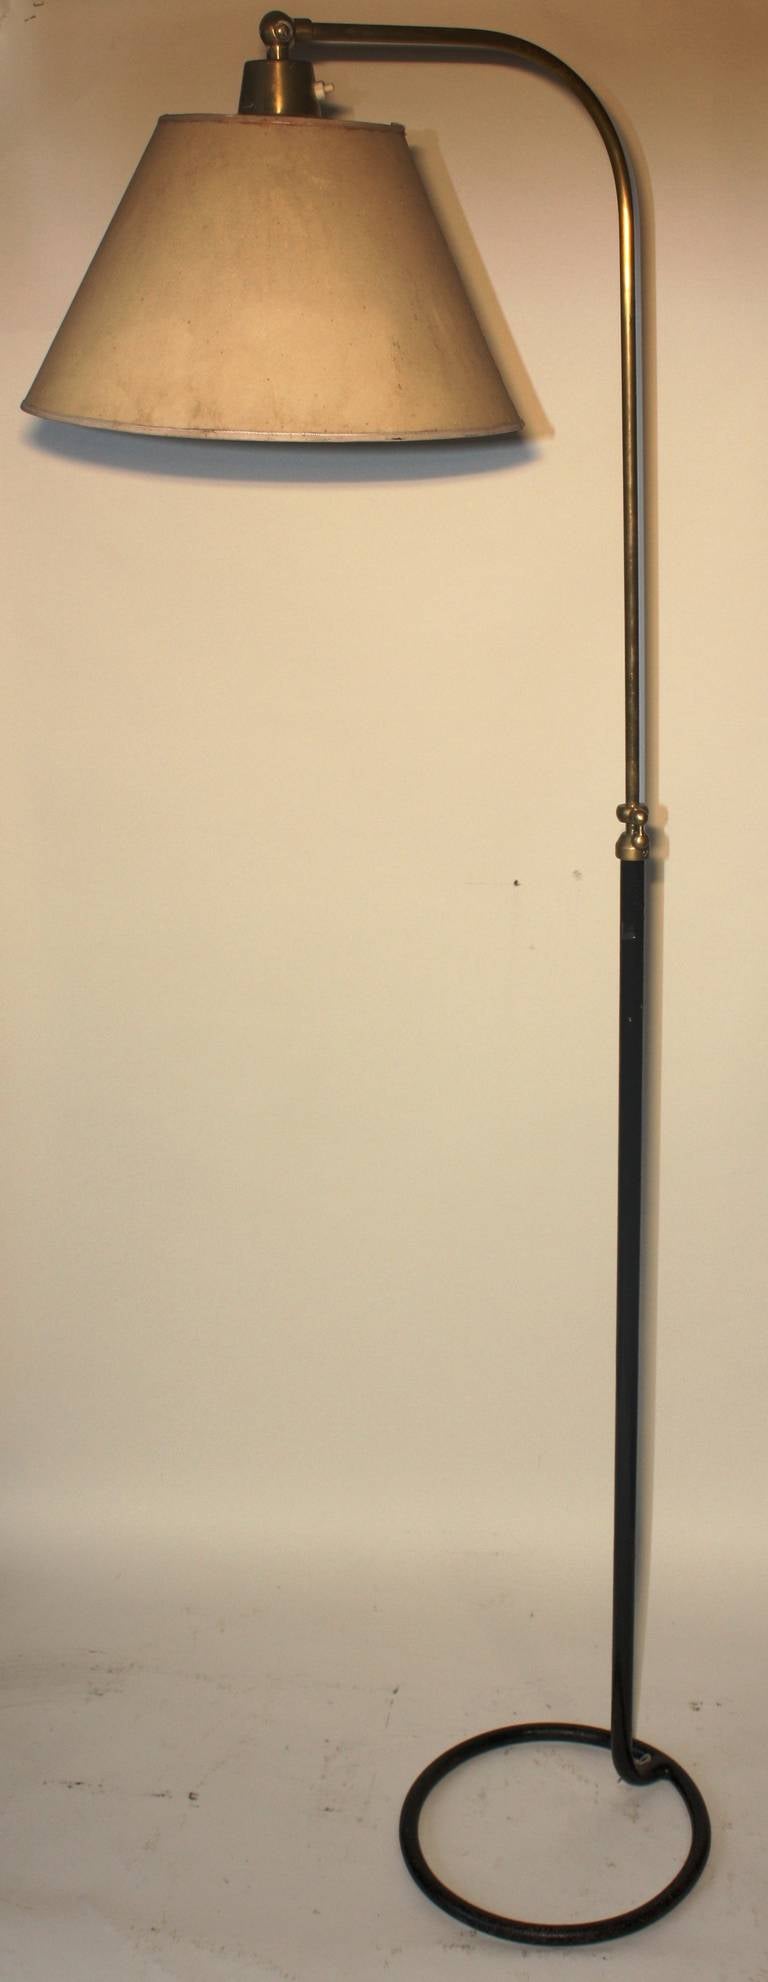 A nice Modernist Style floor lamp in the manner of Jean Royere, circa 1940, French, in tubular steel and brass with a circular base and hanging paper shade.